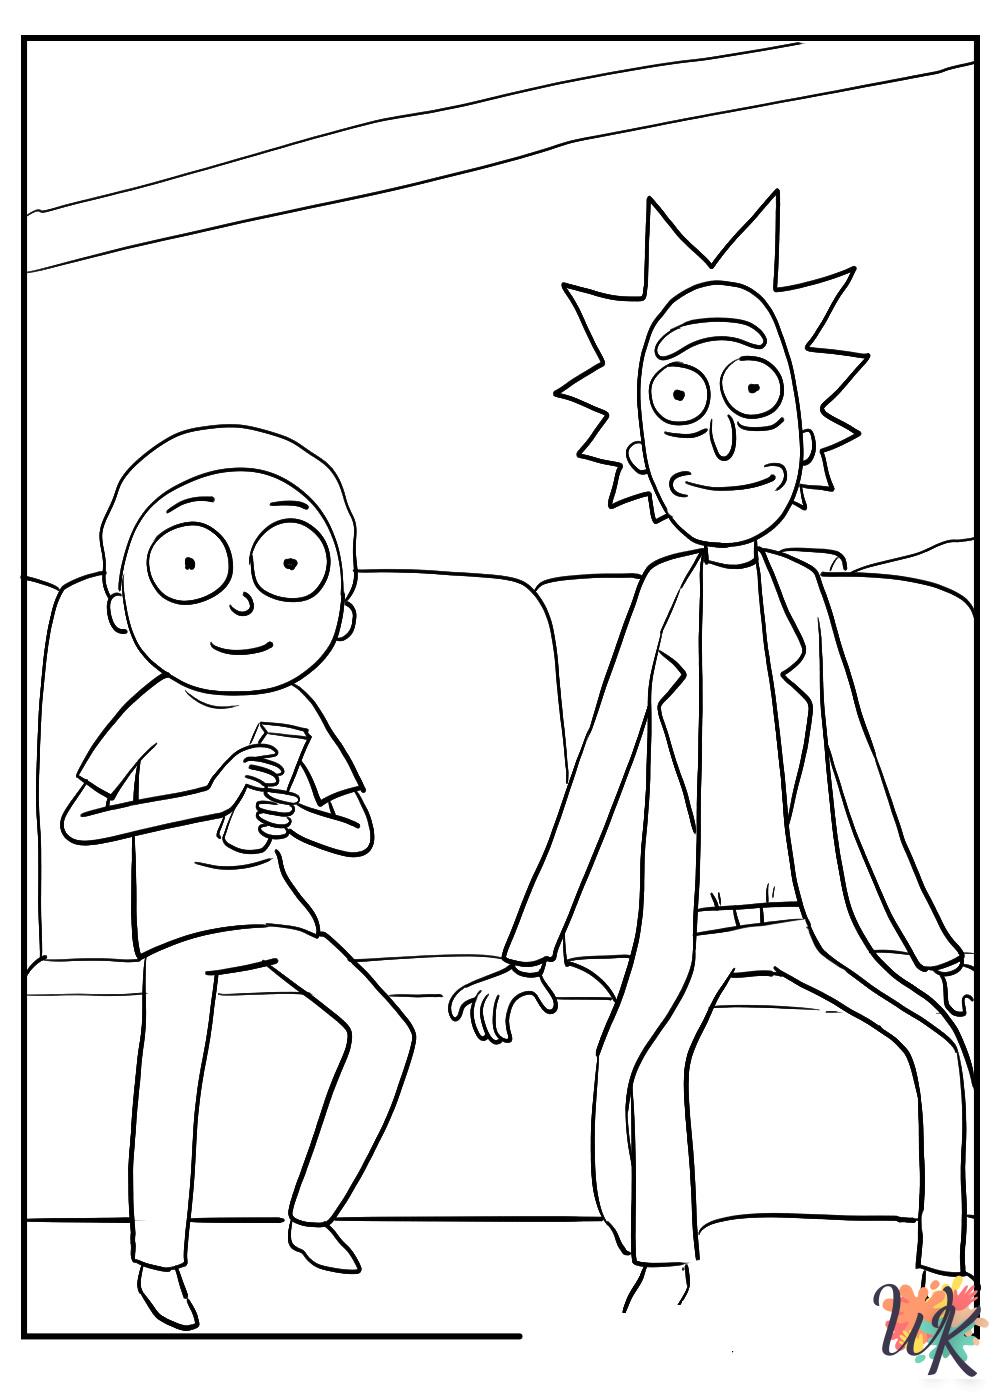 coloring pages for kids Rick and Morty